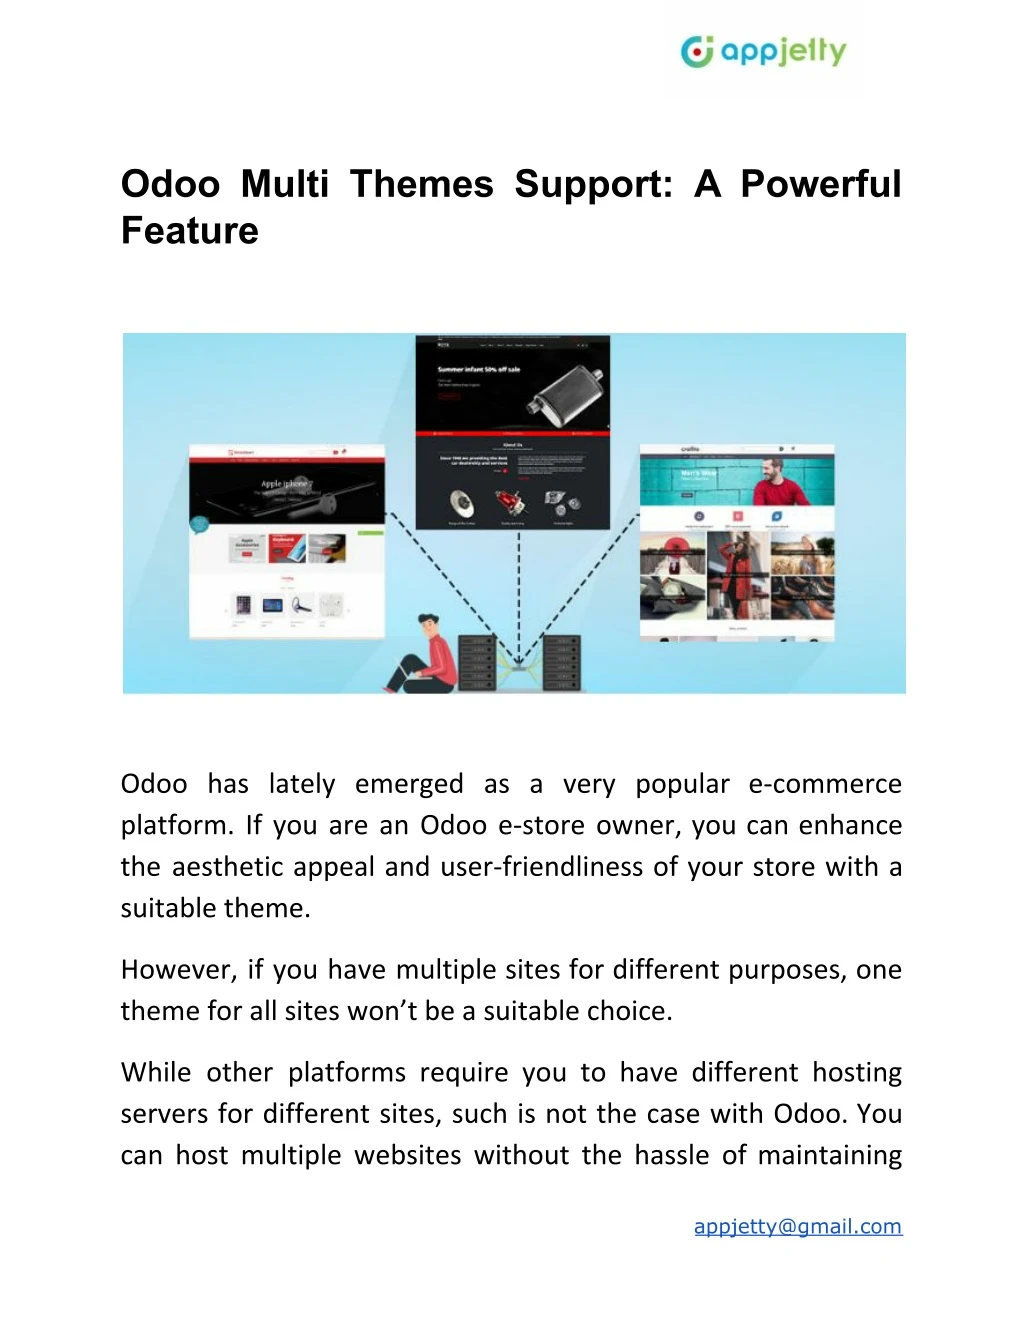 odoo multi themes support a powerful feature